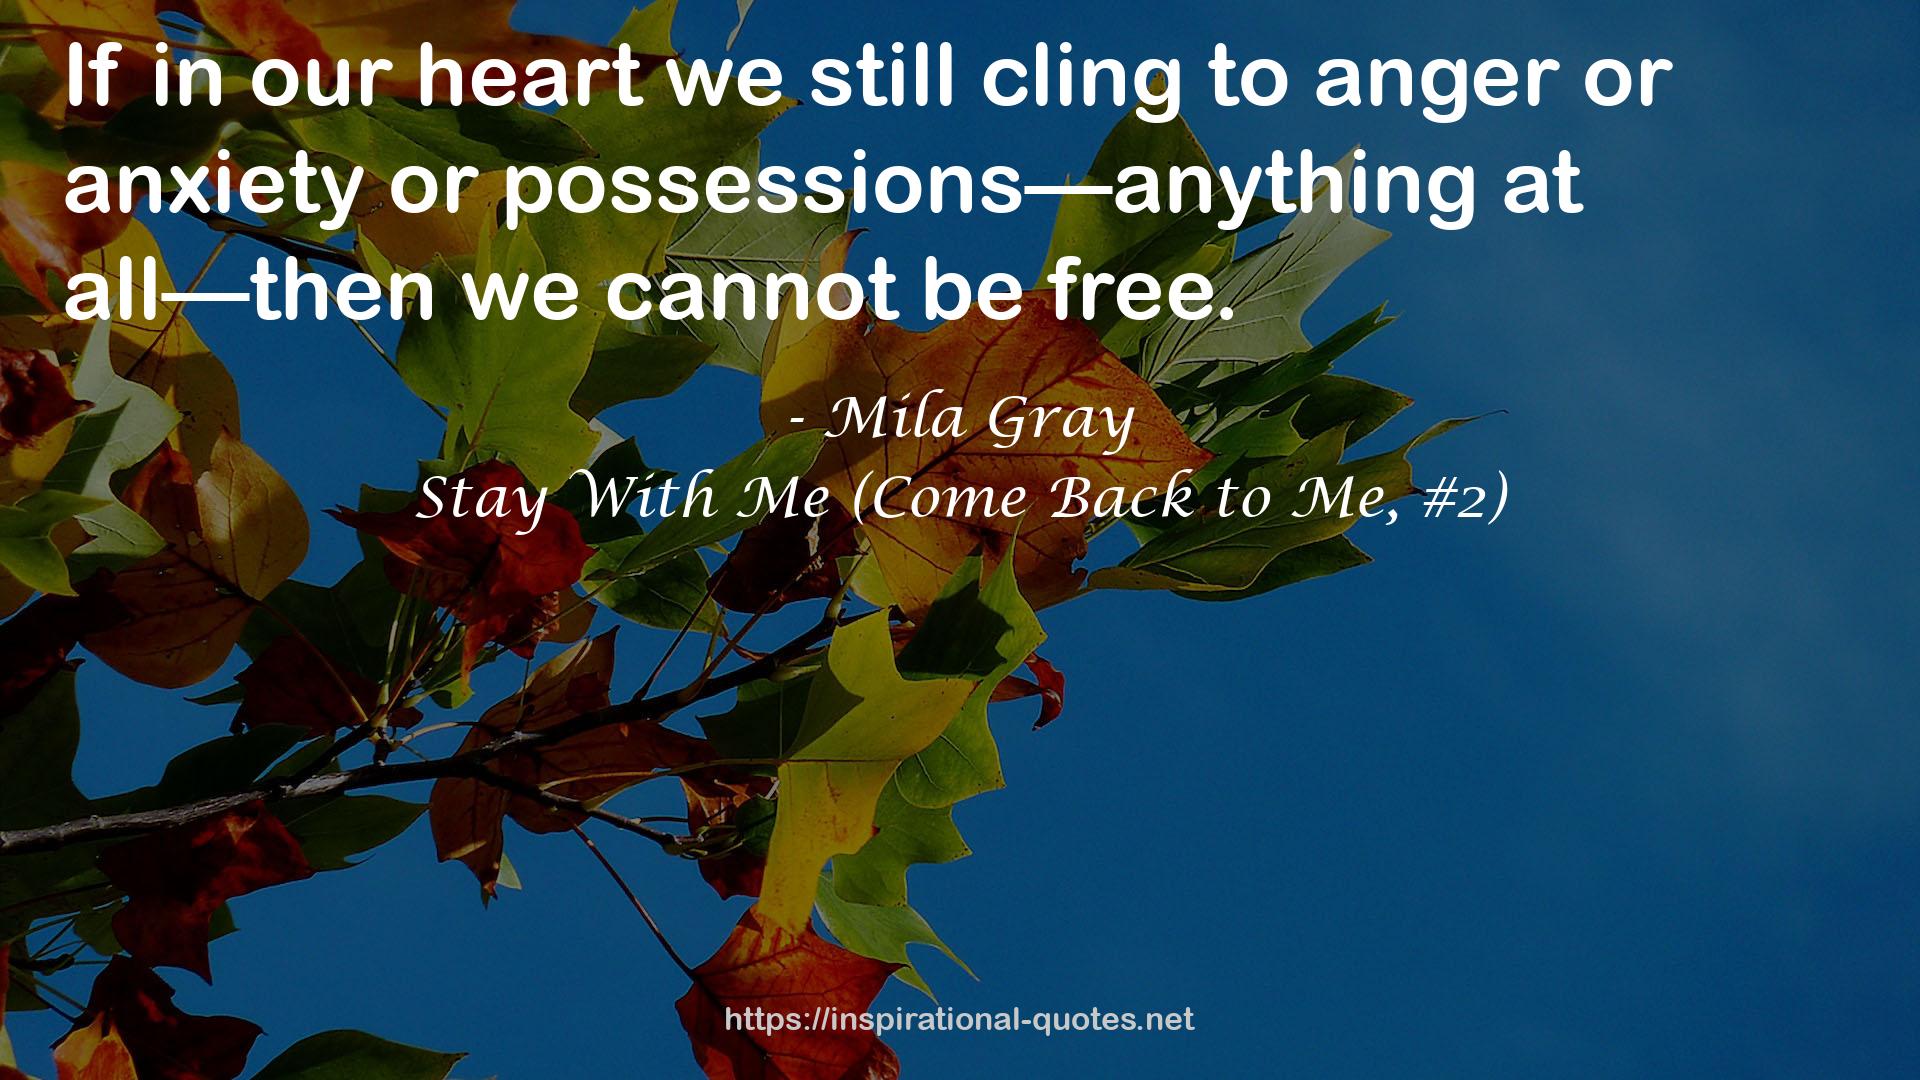 Stay With Me (Come Back to Me, #2) QUOTES